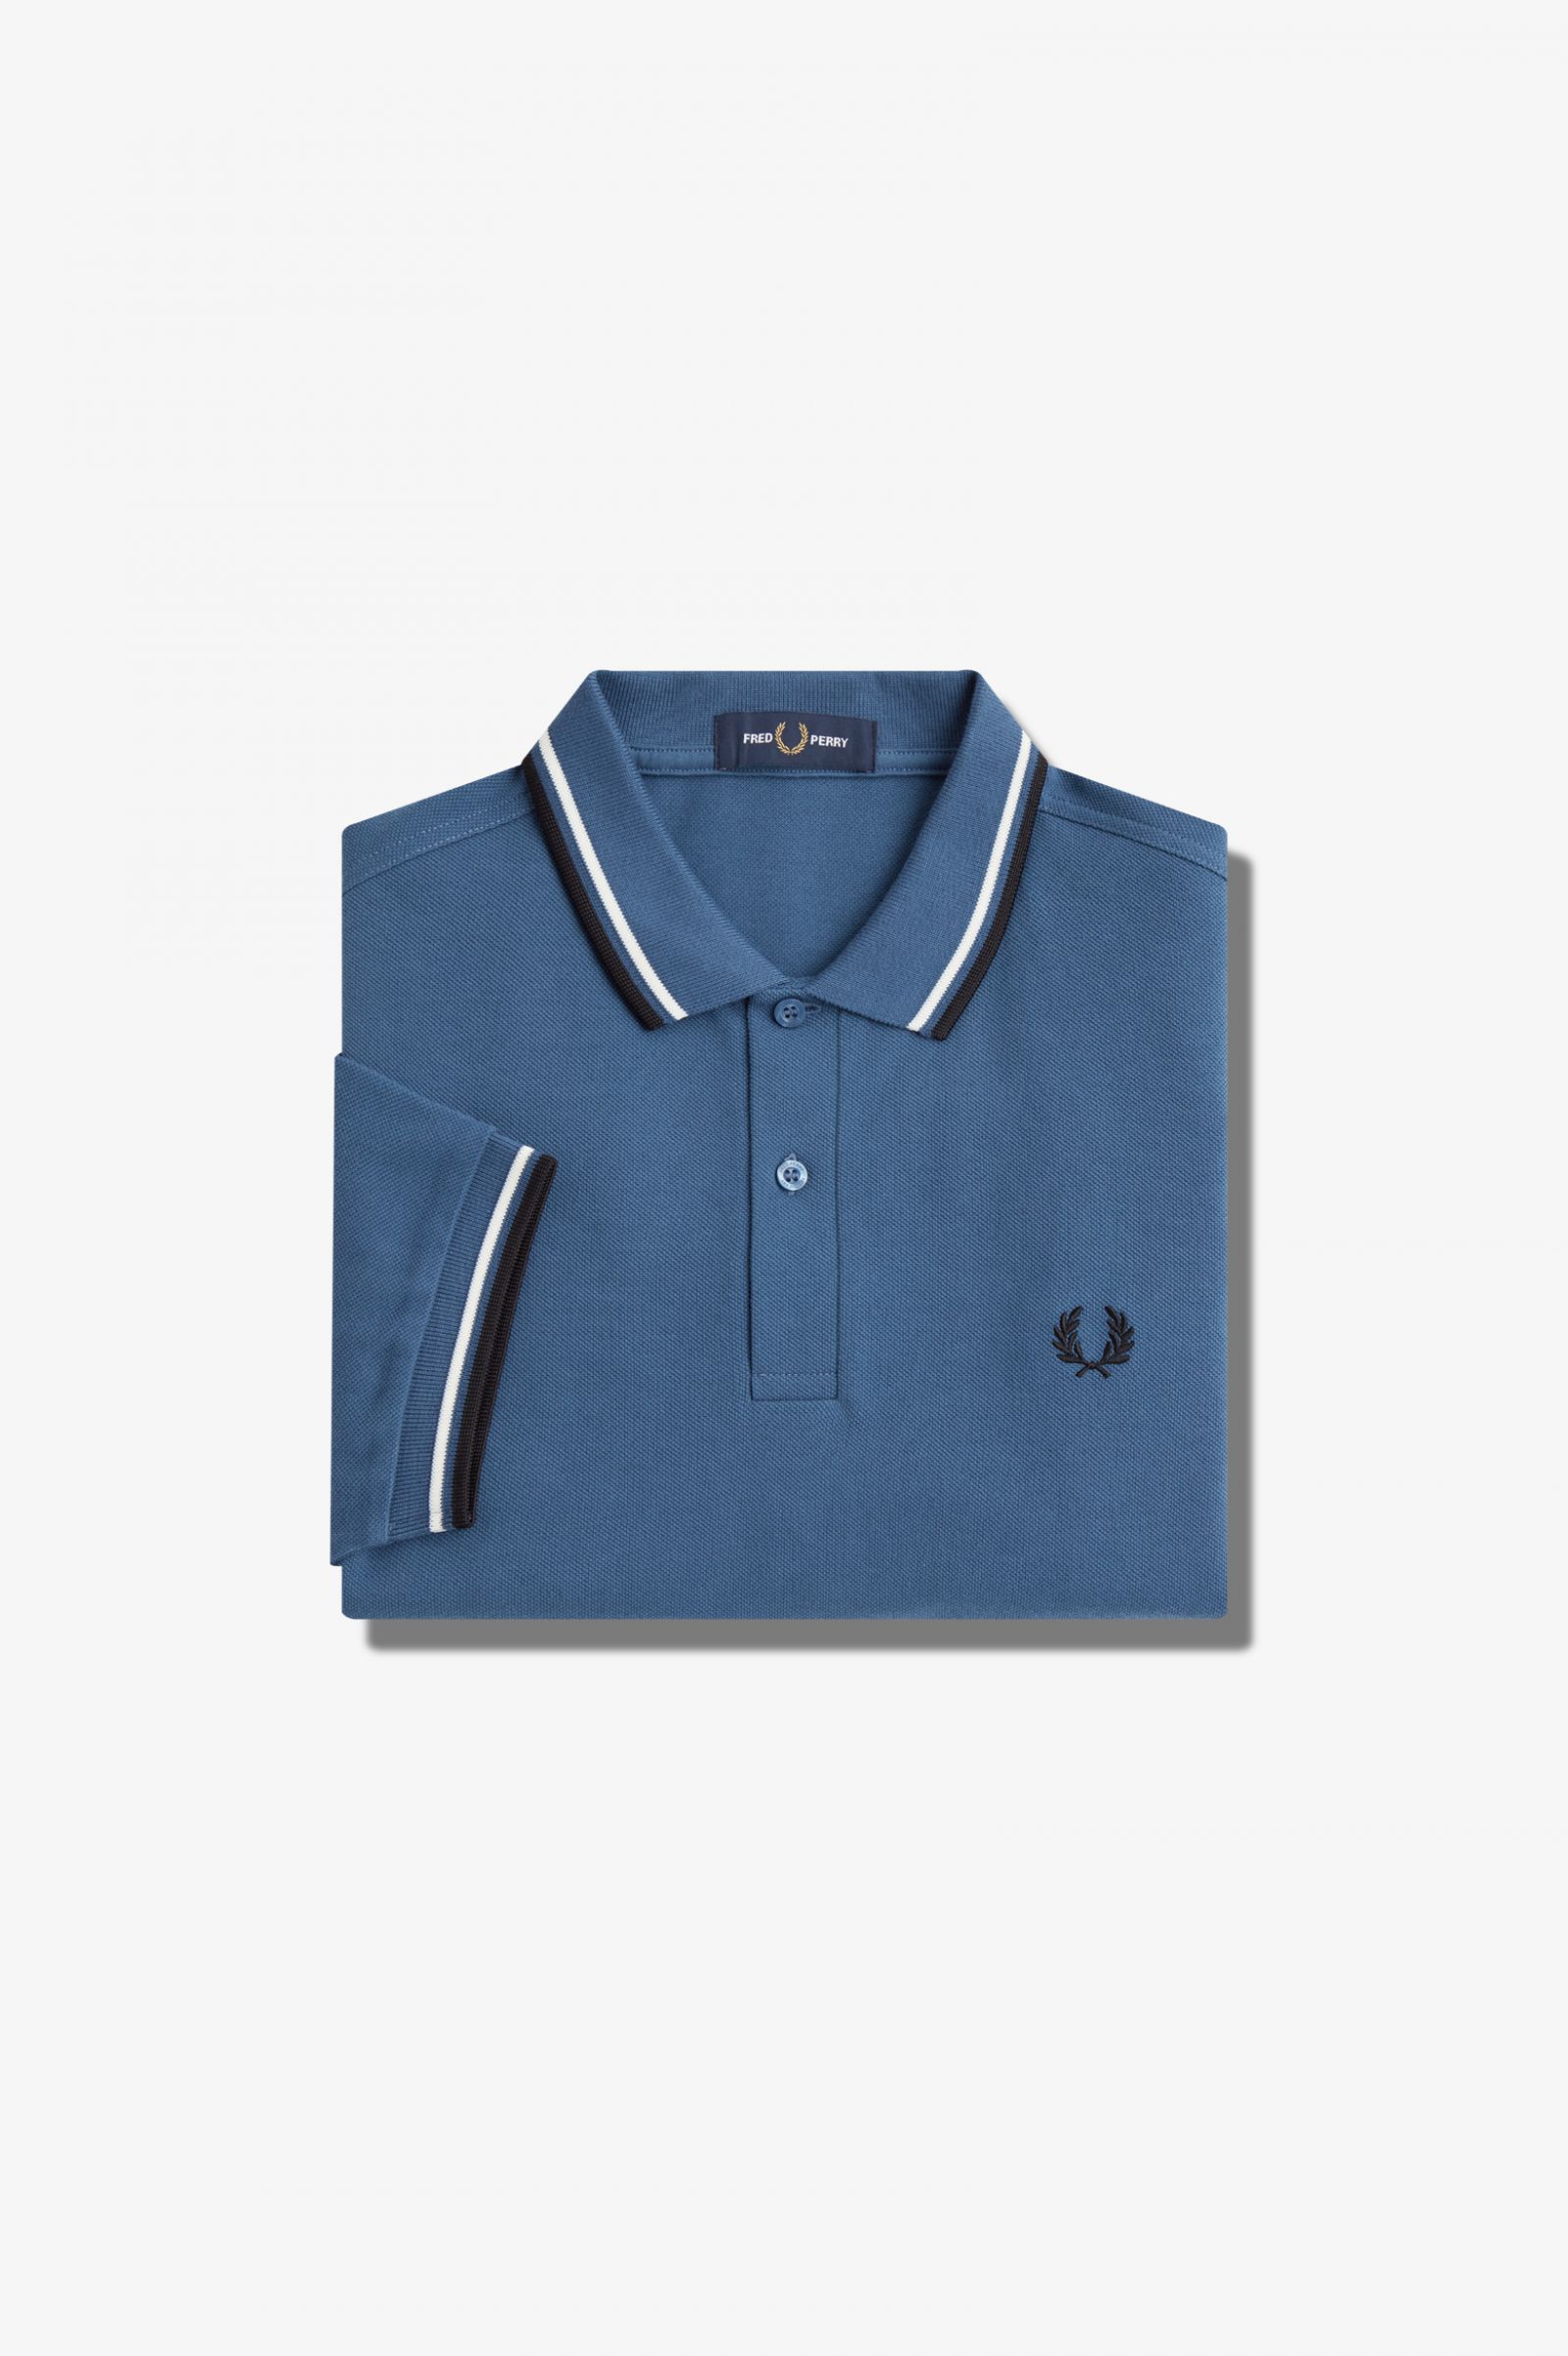 Fred Perry Twin Tipped Poloshirt in Midnightblue/Snowwhite/Black